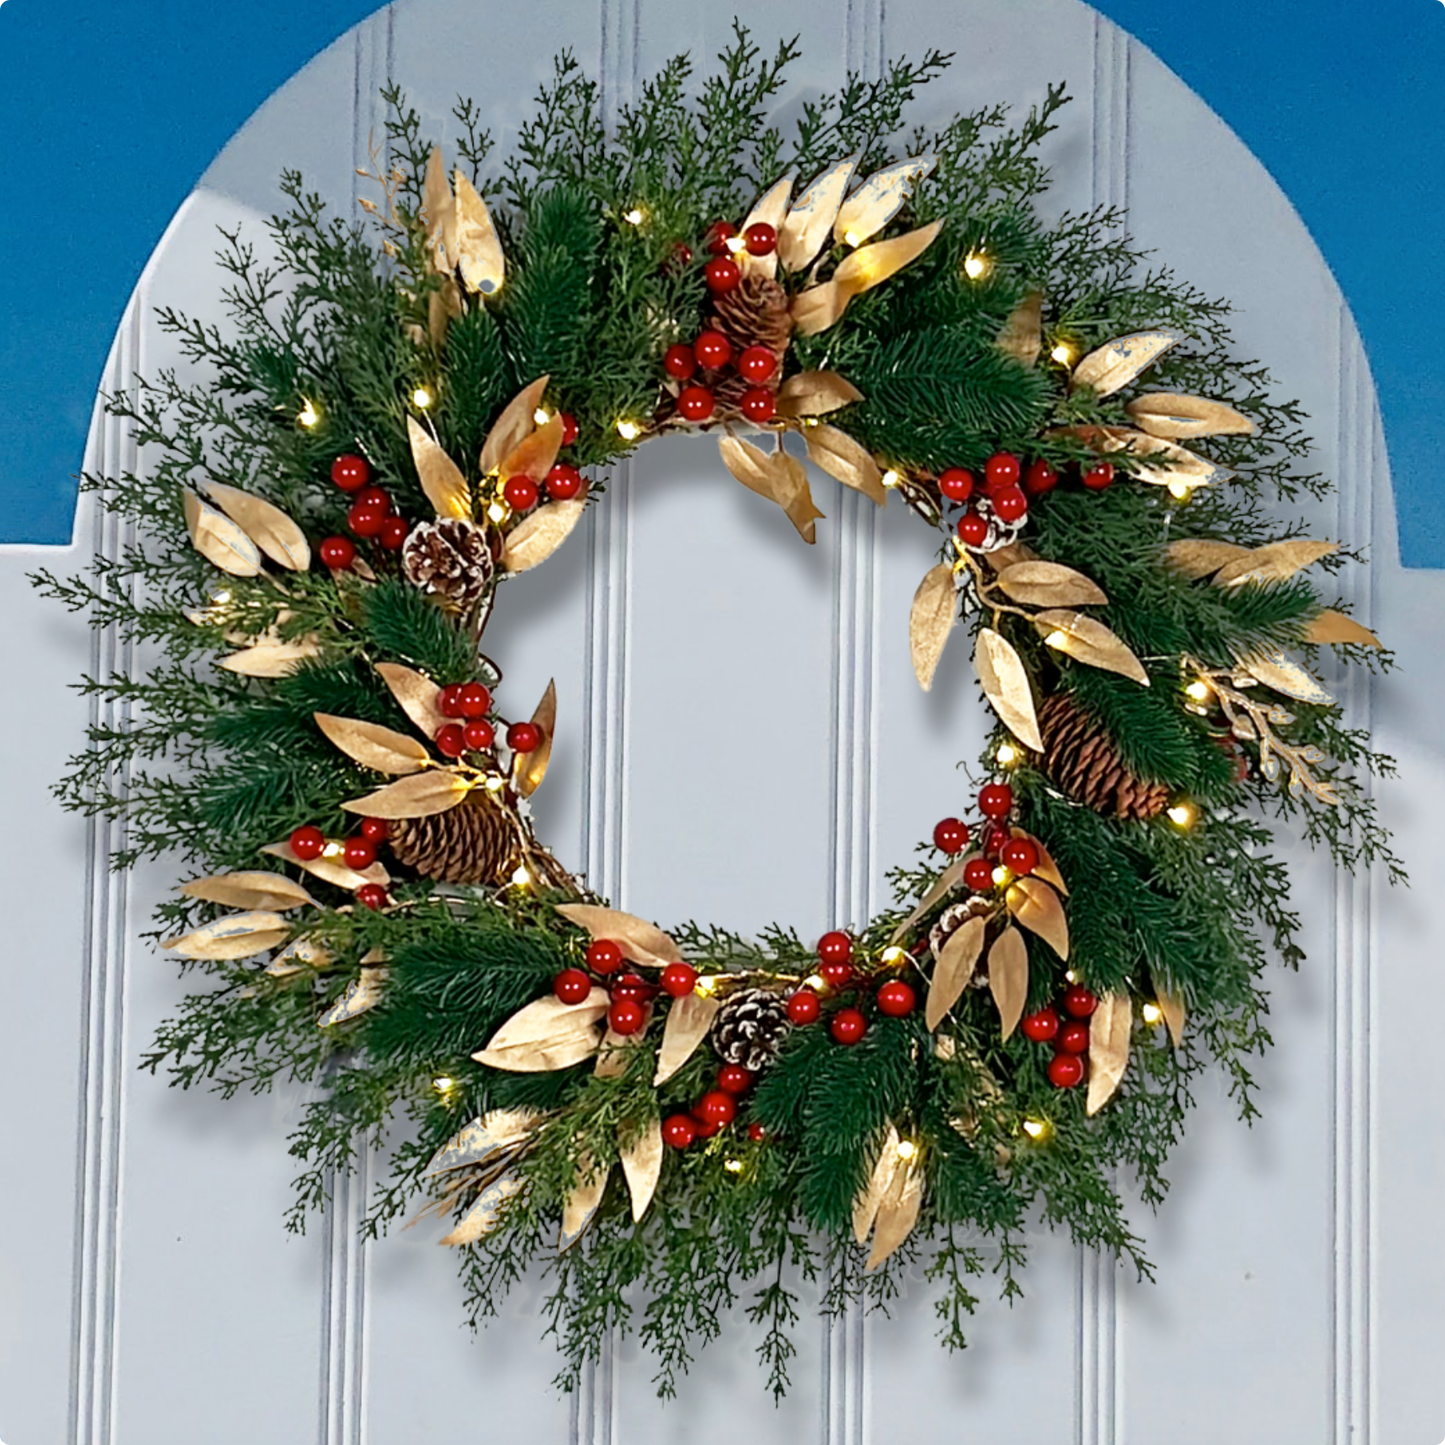 Gold Leaves Christmas Wreath with Lights, 20 inch PreLit Christmas Wreath for Front Door